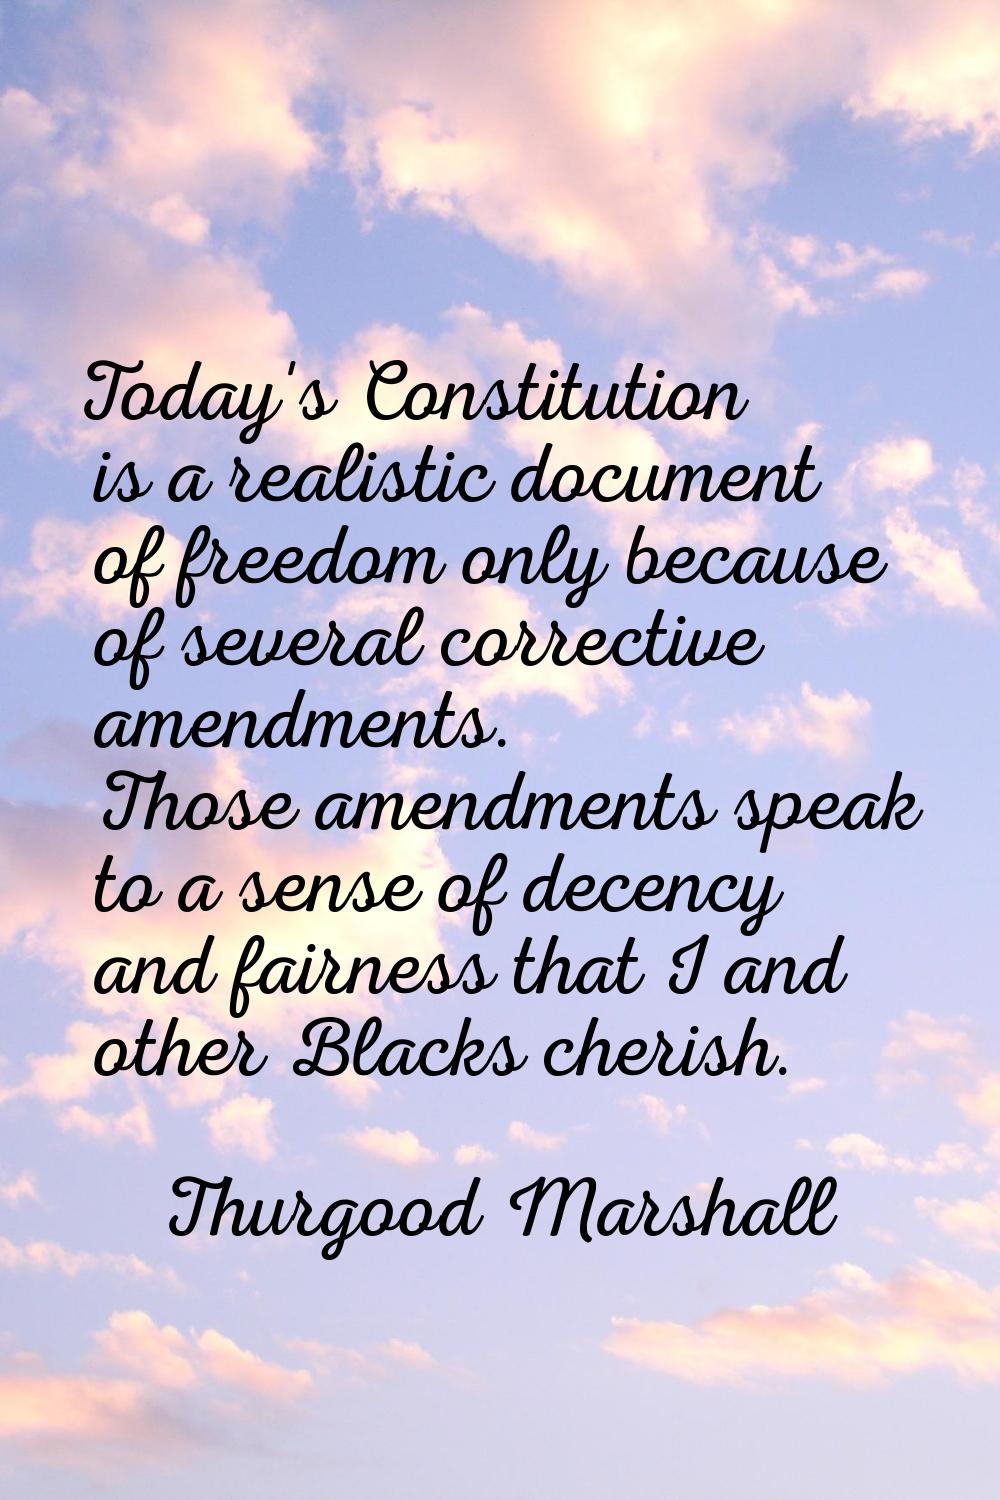 Today's Constitution is a realistic document of freedom only because of several corrective amendmen